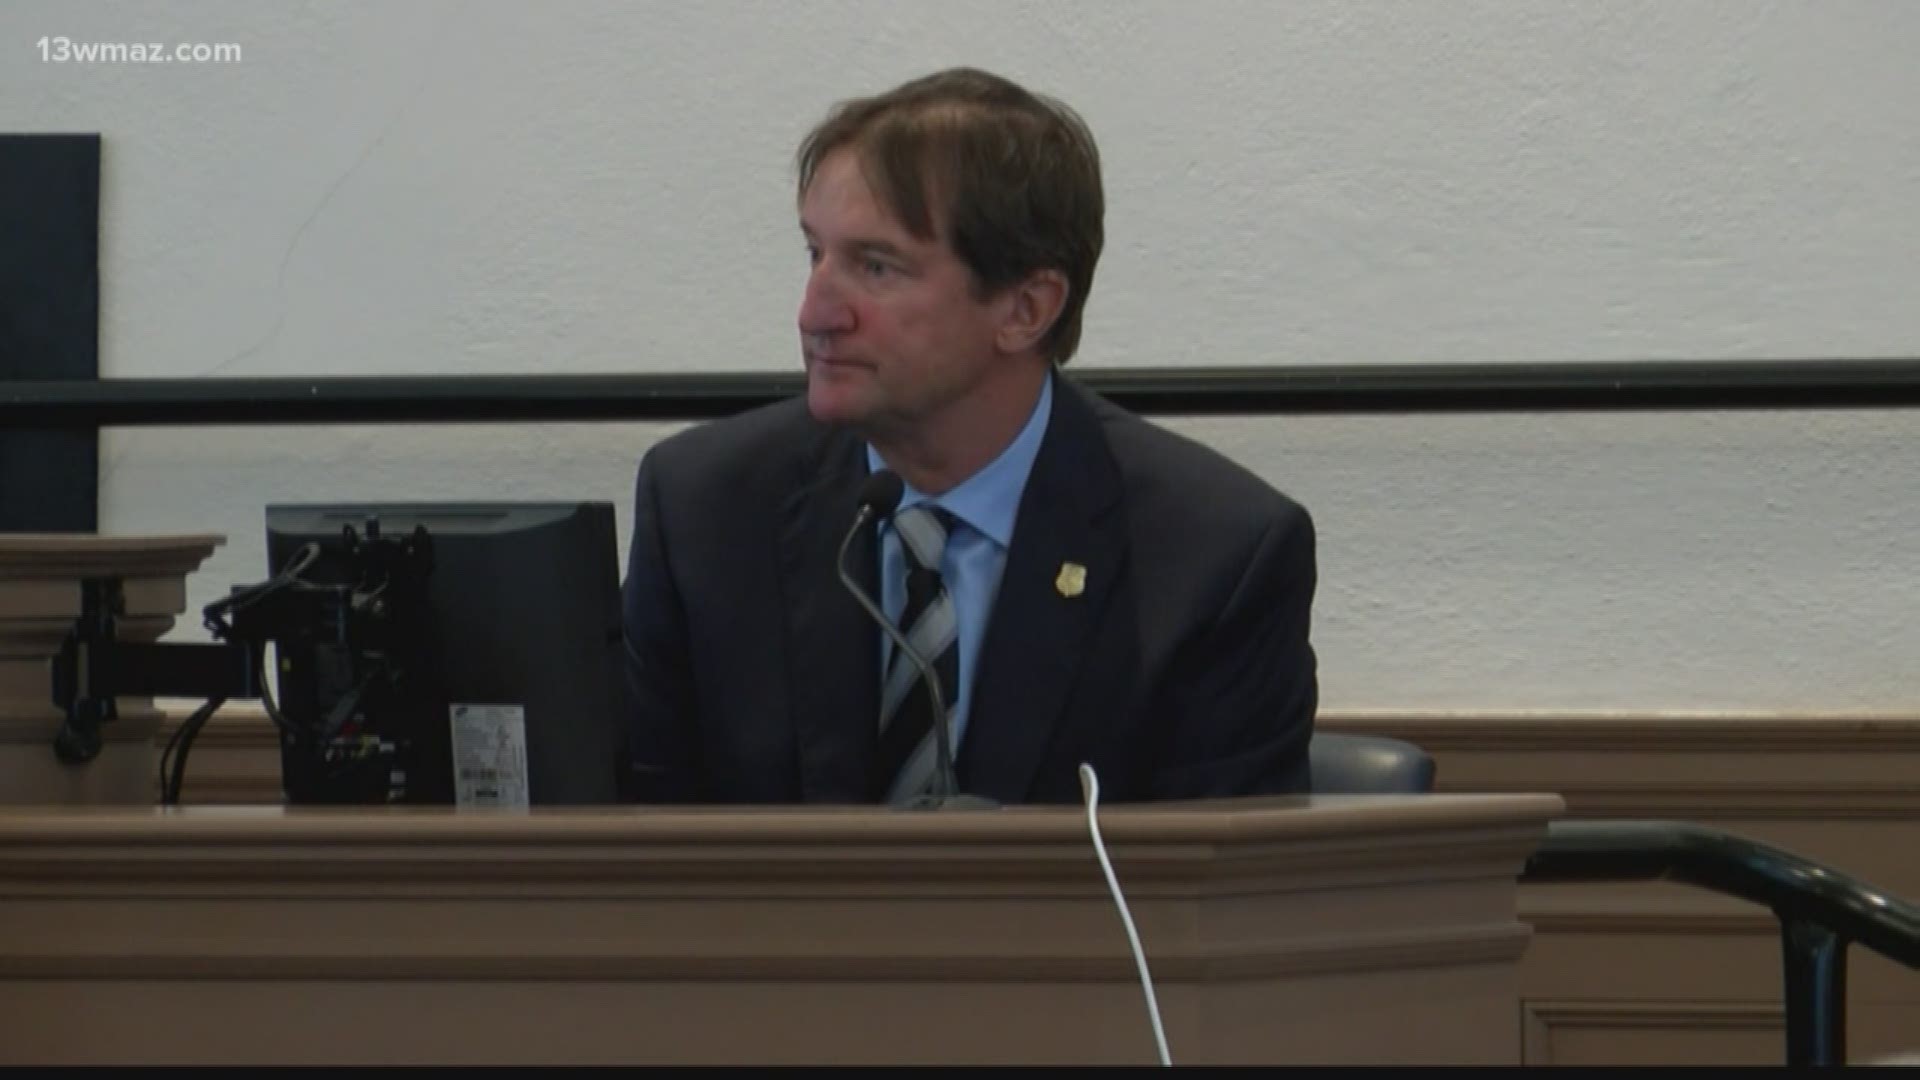 The GBI says it had the names of both men charged in the Tara Grinstead murder case on file since 2005. During his testimony Tuesday afternoon at the Bo Dukes trial, retired GBI investigator Gary Rothwell said Ryan Duke and Bo Dukes' names both appear twice in their records.